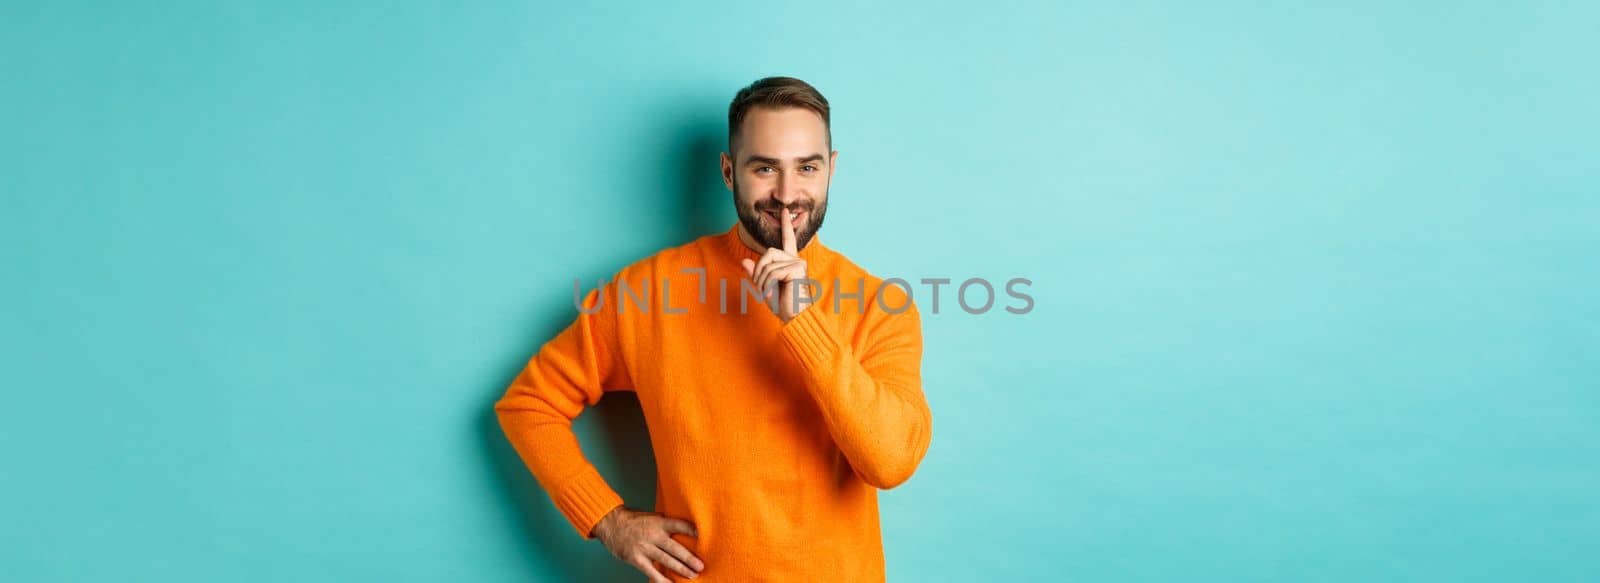 Happy man asking keep voice down, shushing and smiling, prepare surprise, hushing at camera, standing over turquoise background.